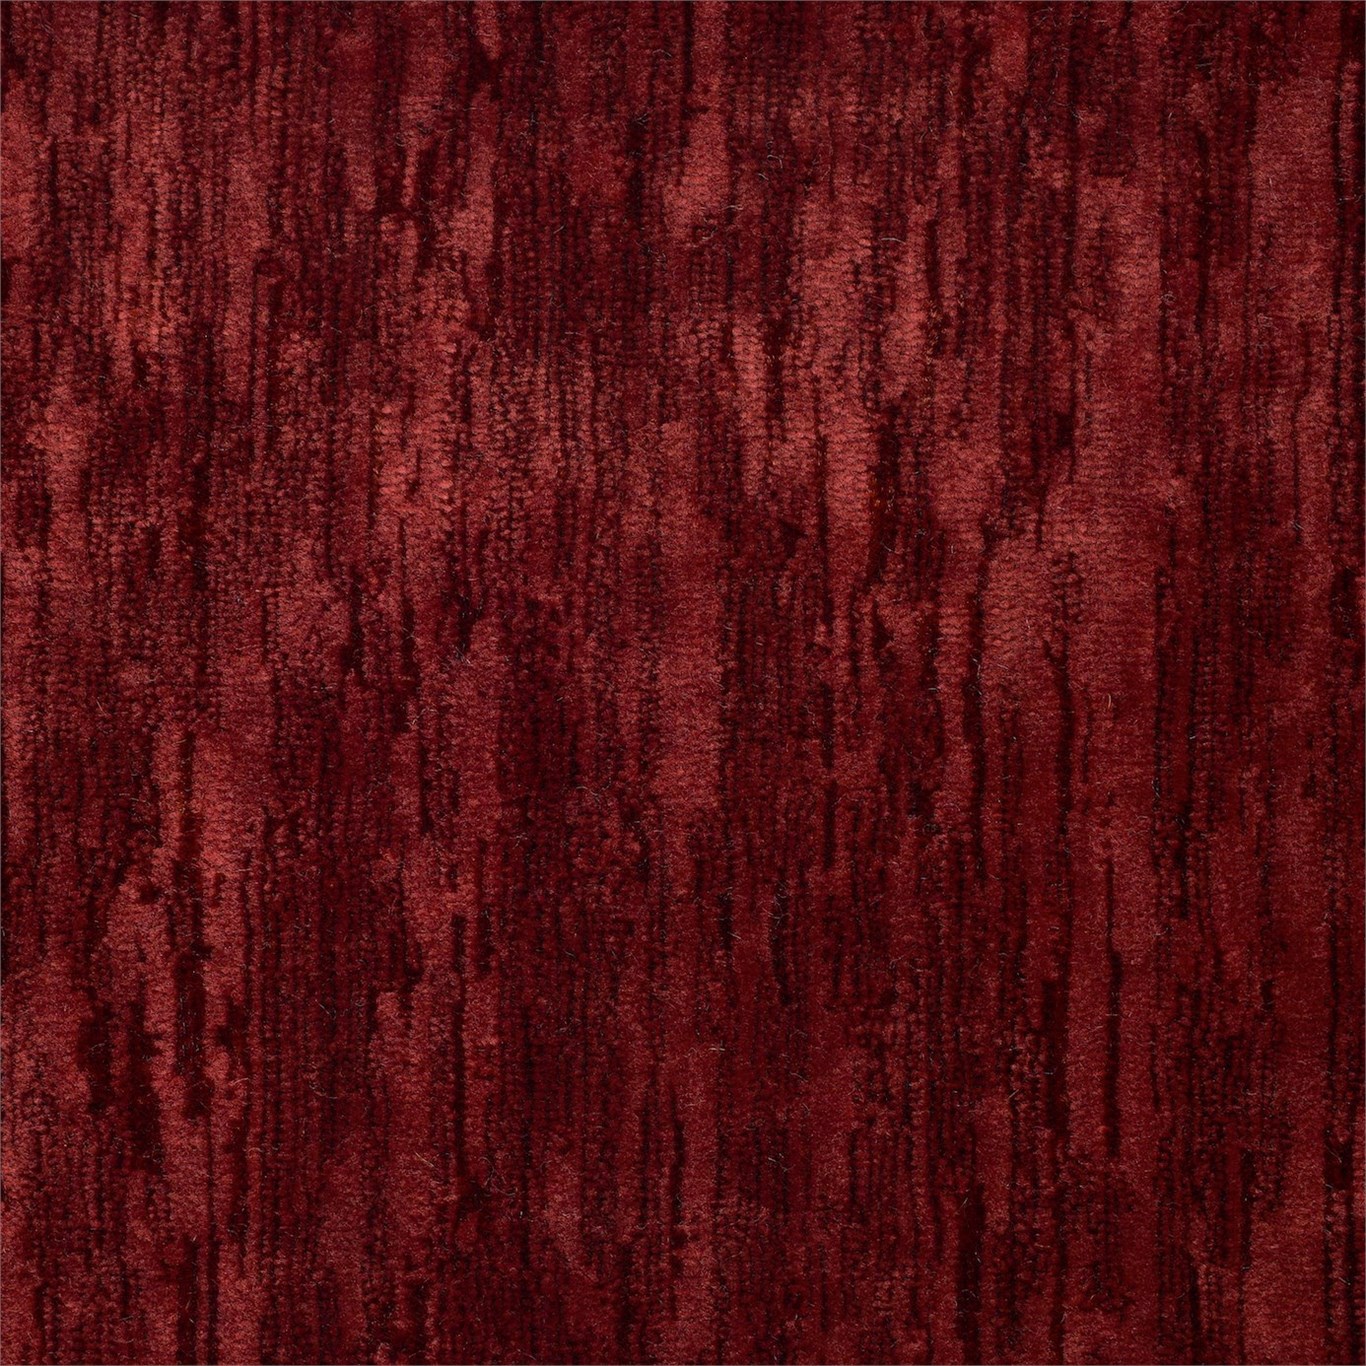 Icaria Brick Red Fabric by SAN